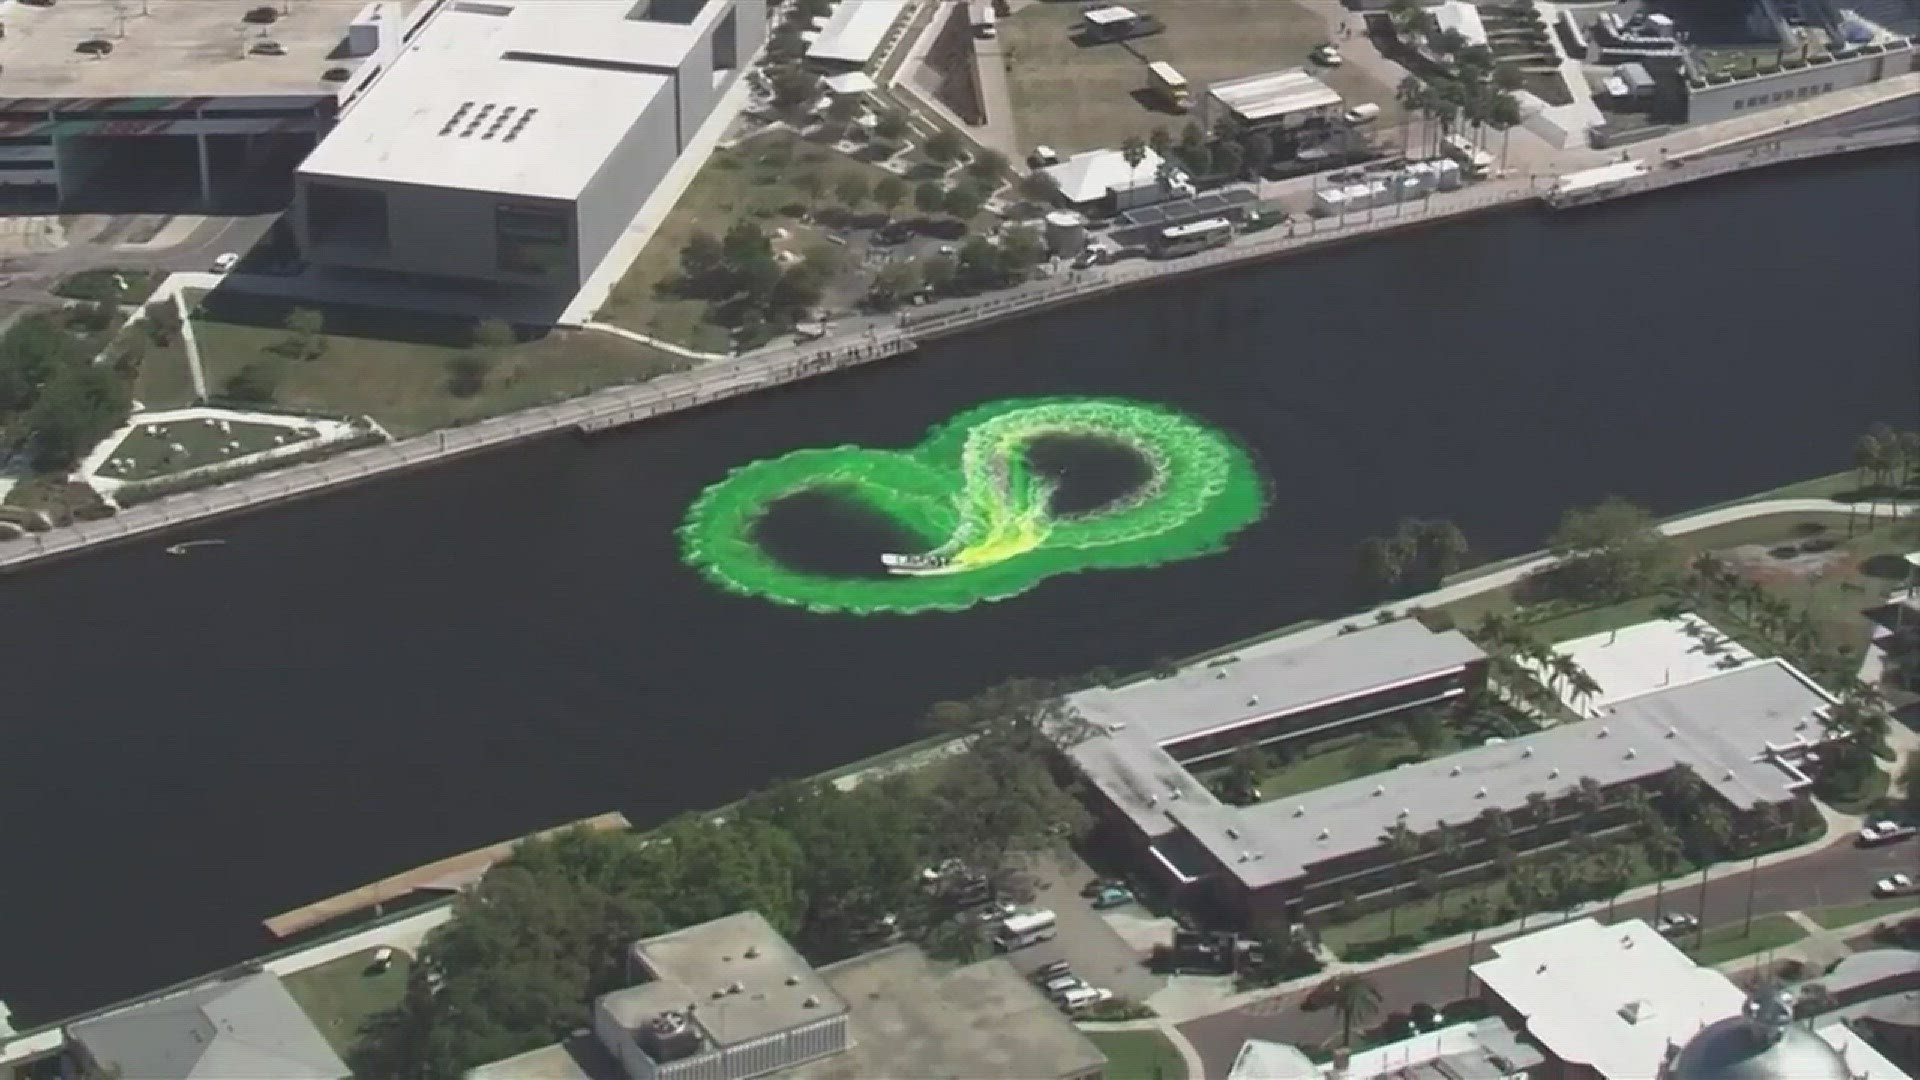 Dye testing took place ahead of the Mayor's River O'Green celebration, which is set for Saturday, March 17.